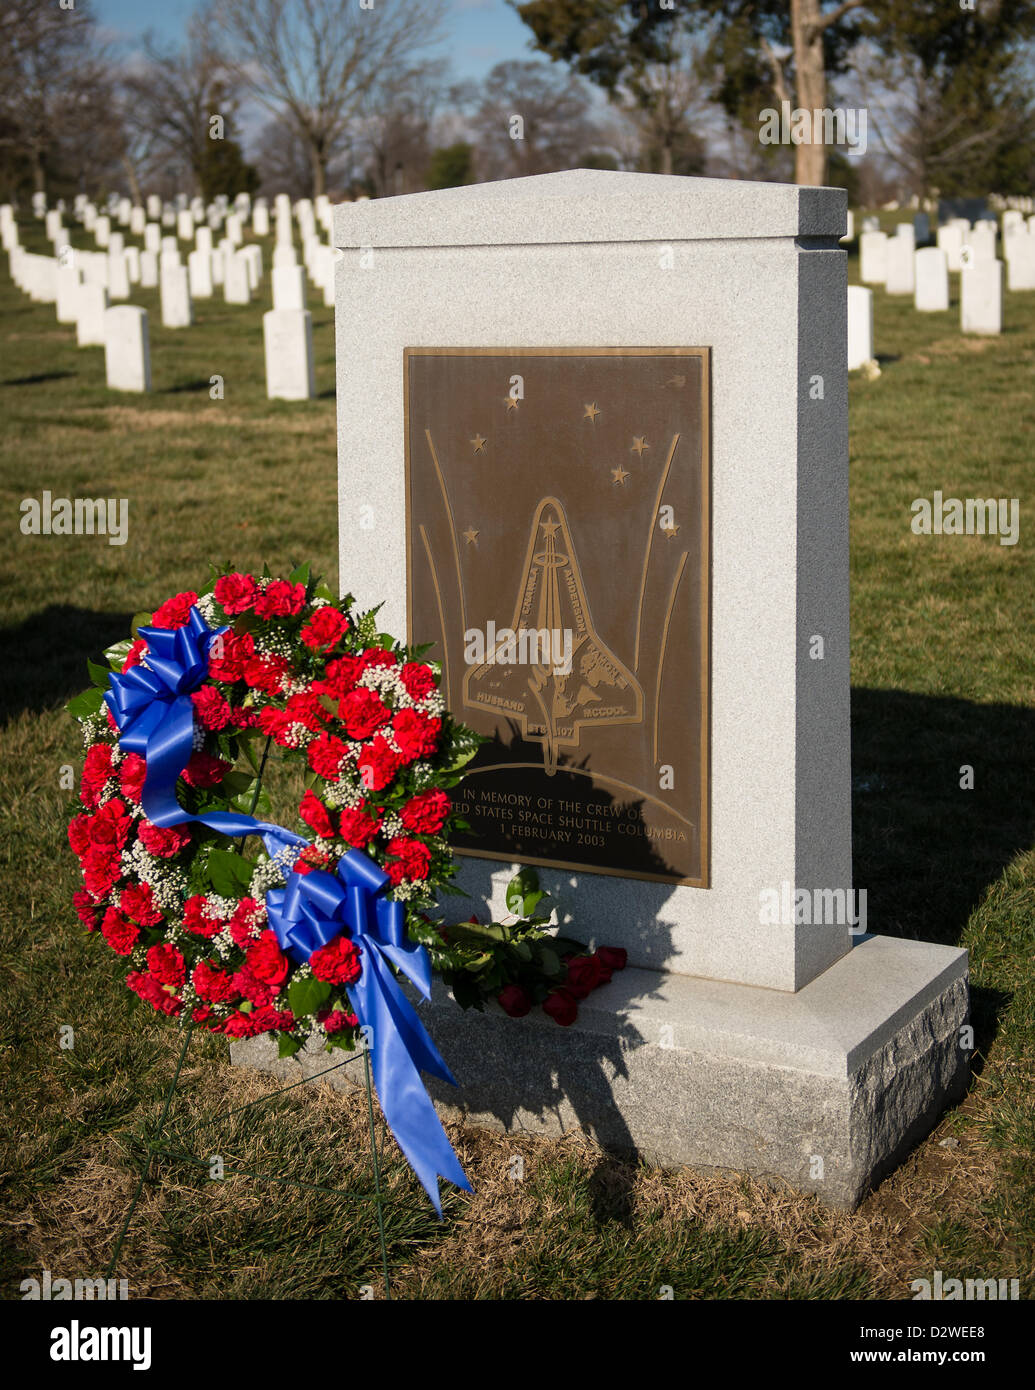 The Space Shuttle Columbia Memorial with a memorial wreath as part of NASA's Day of Remembrance February 1, 2013 at Arlington National Cemetery, Arlington, VA.  Wreathes were laid in memory of those men and women who lost their lives in the quest for space exploration. Stock Photo